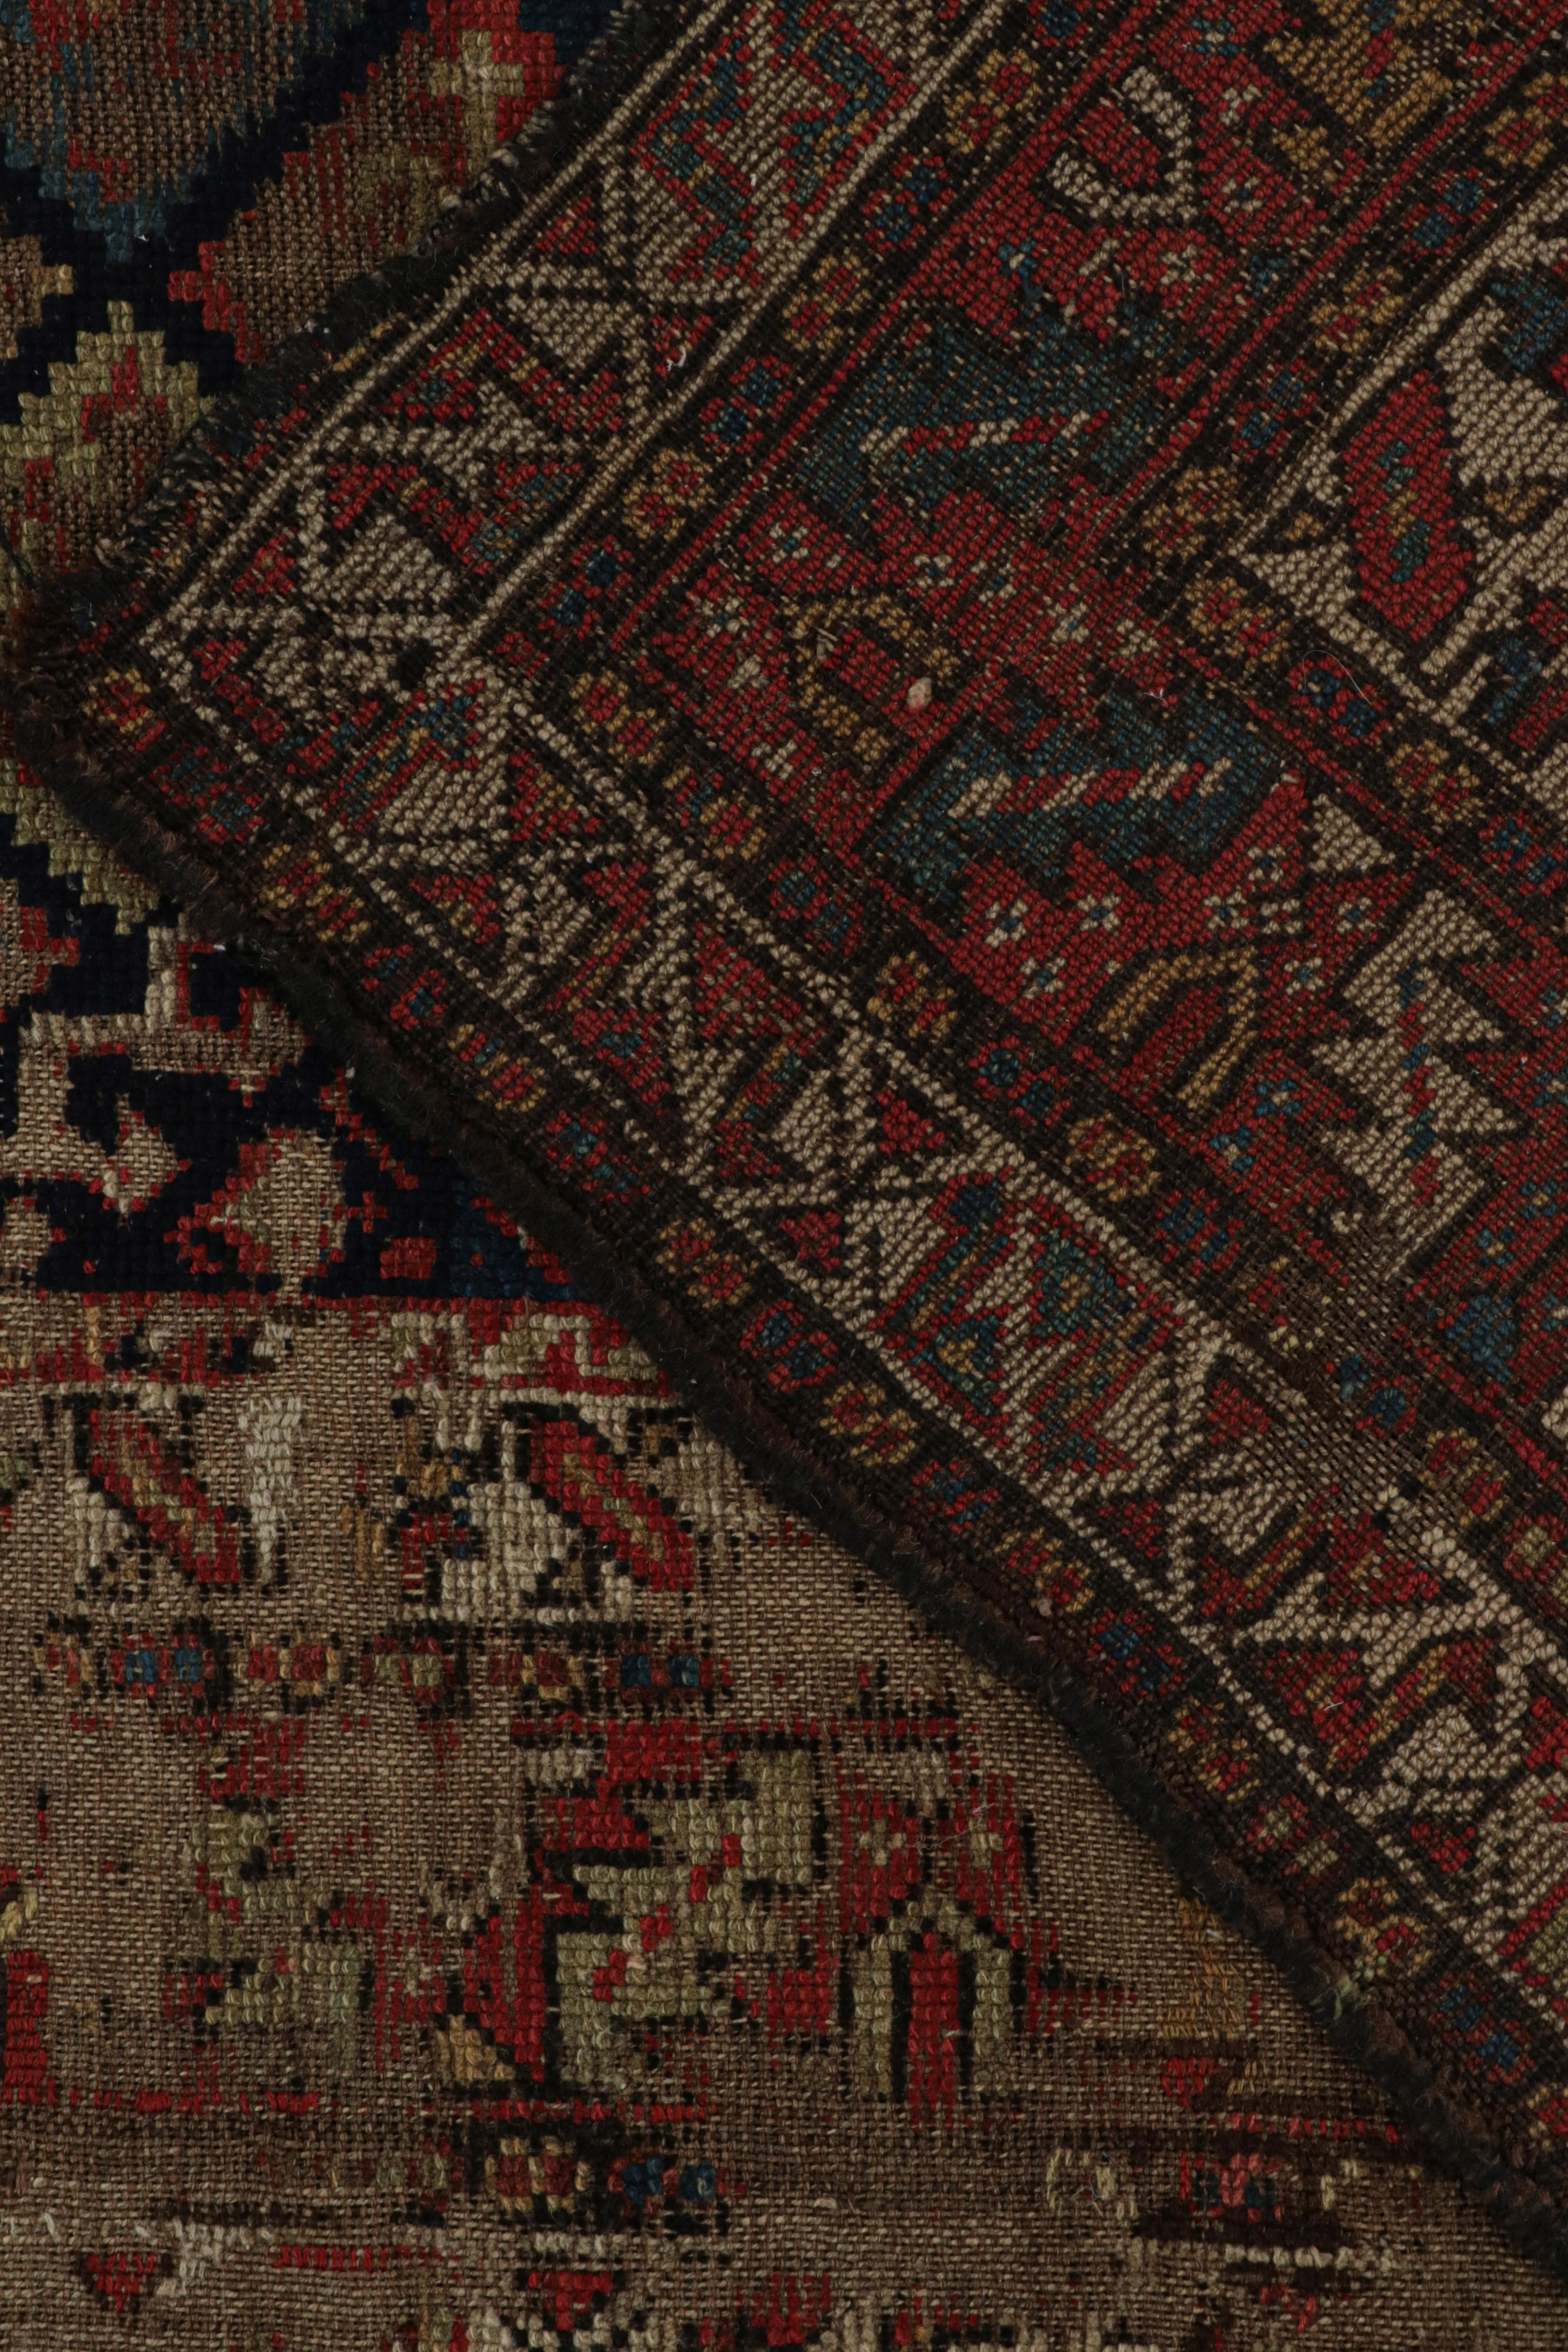 Late 19th Century Antique Caucasian Rug in Beige, Blue & Red Geometric Patterns, from Rug & Kilim